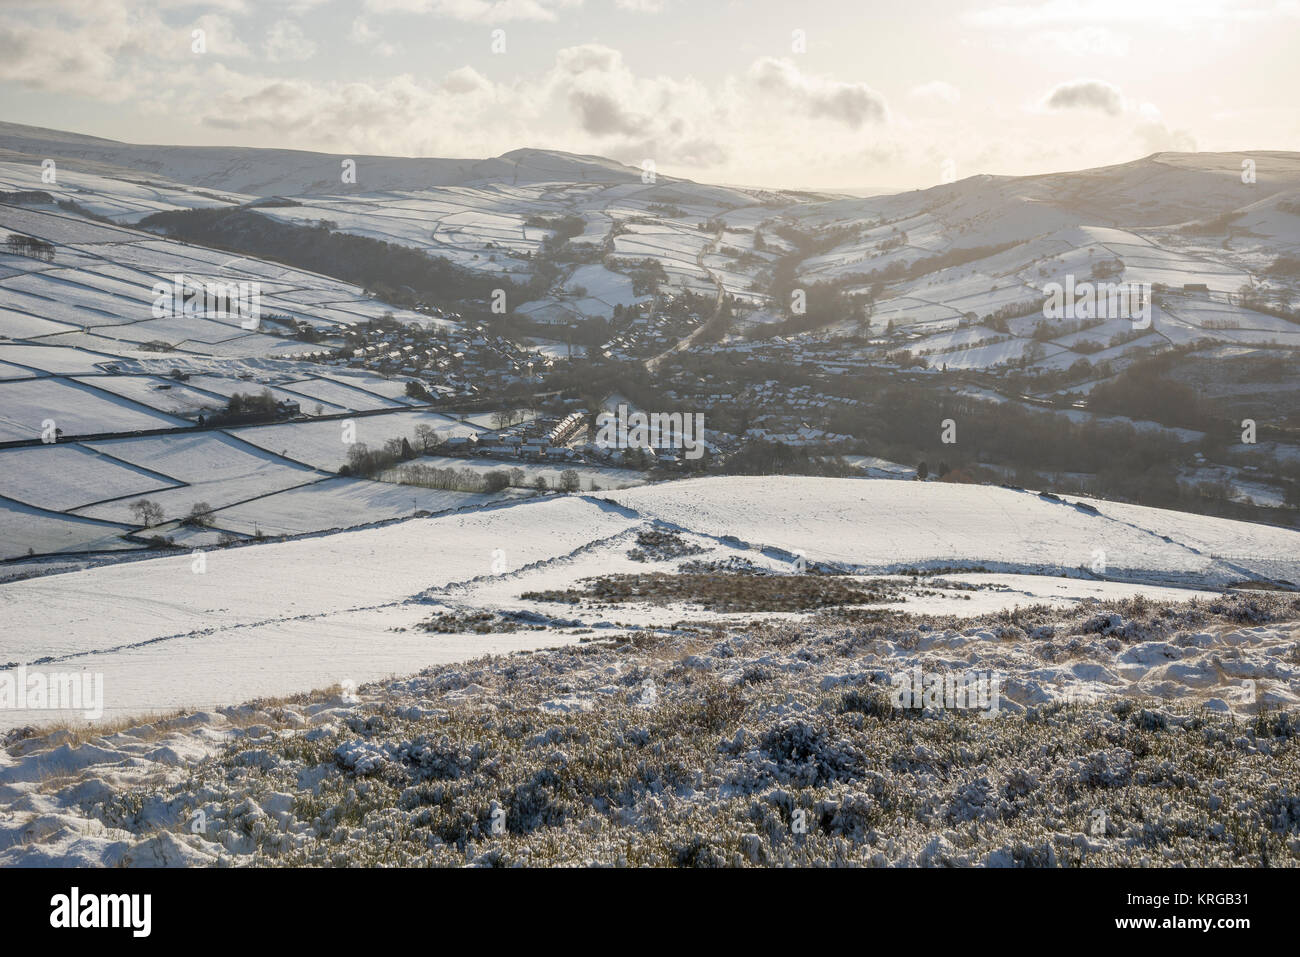 The village of Hayfield on a beautiful snowy winter morning, Derbyshire, England. Stock Photo